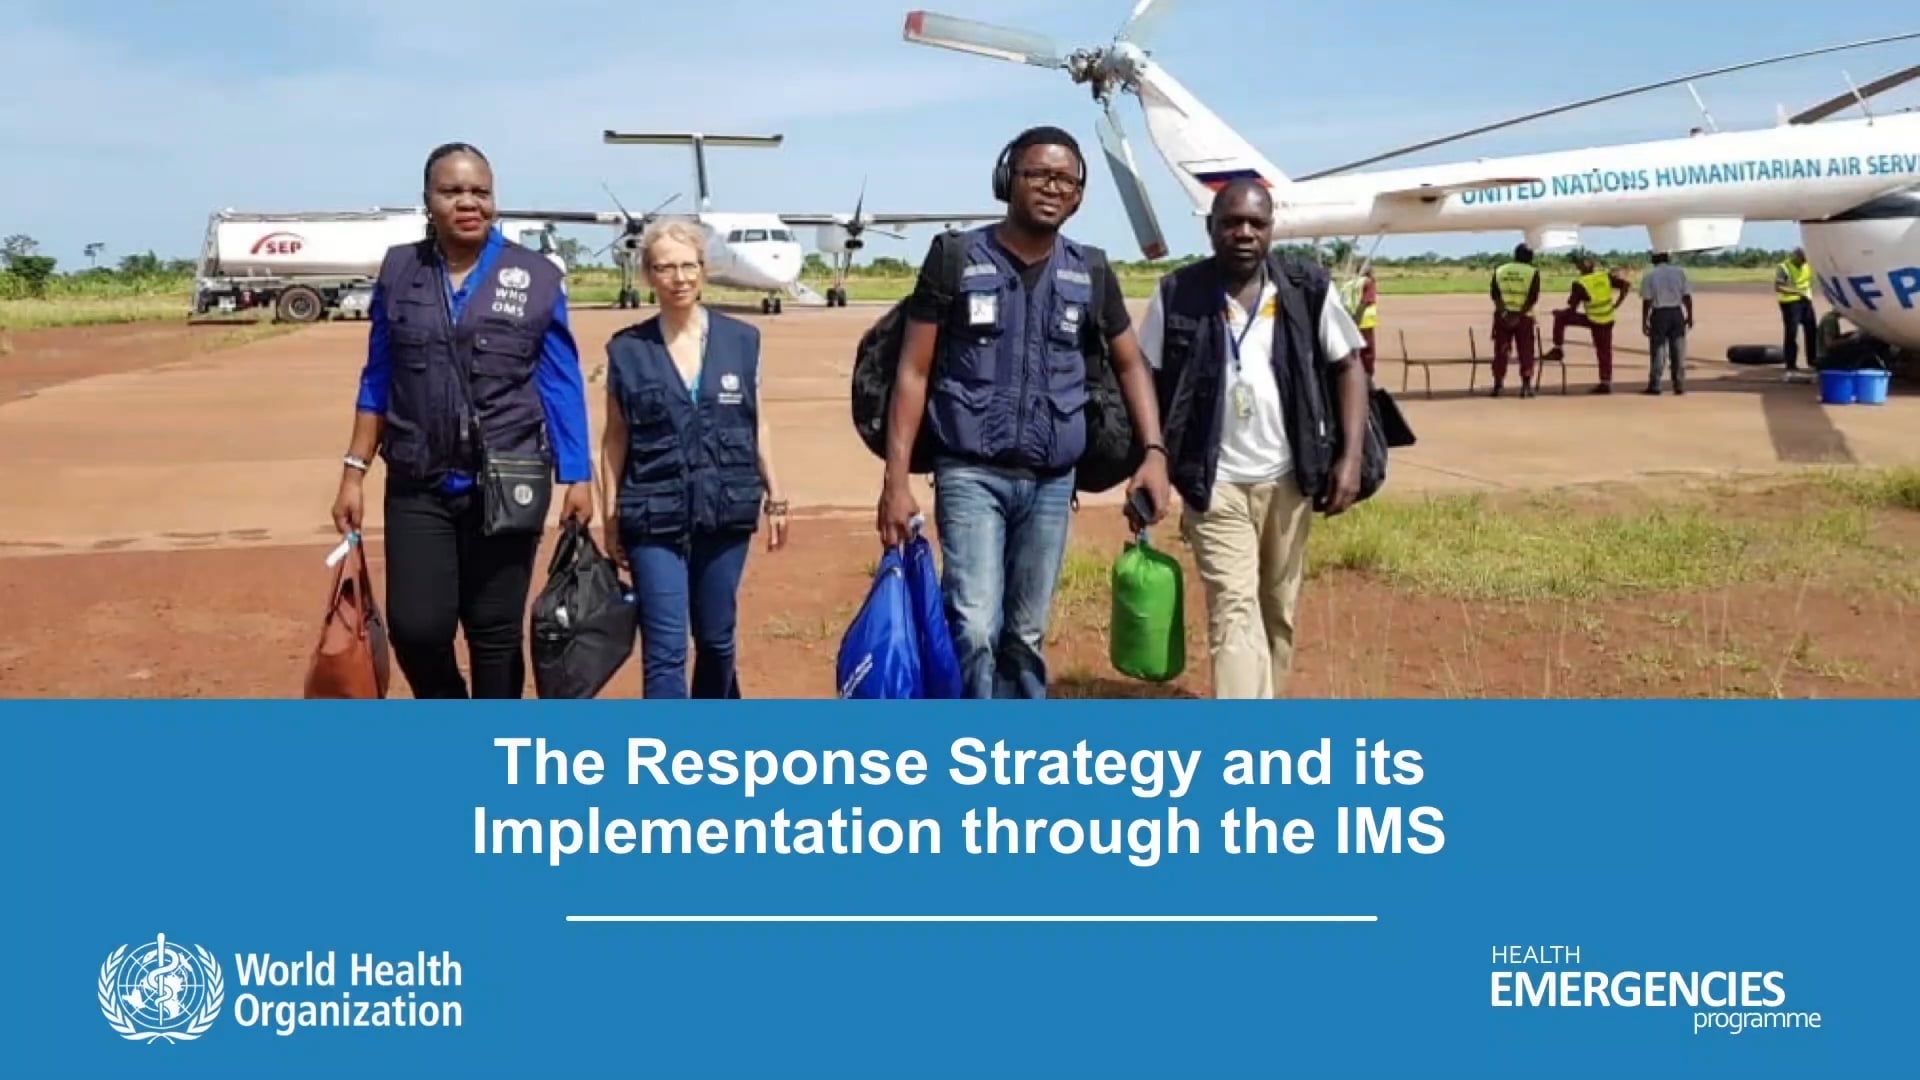 Module 2: The Response Strategy and its Implementation through the IMS